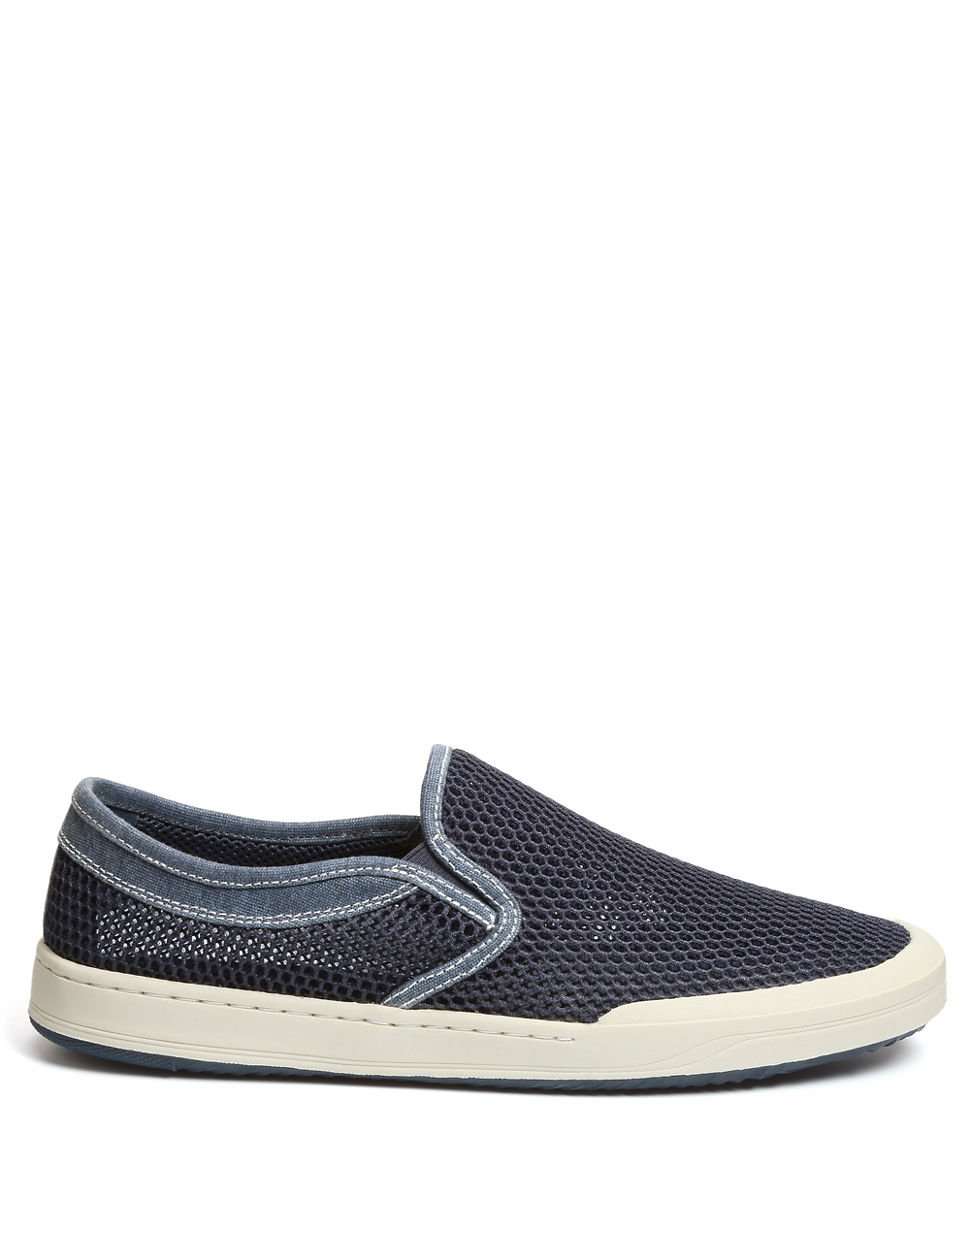 G.H.BASS Hopewell Canvas Slip-ons in Blue for Men - Lyst